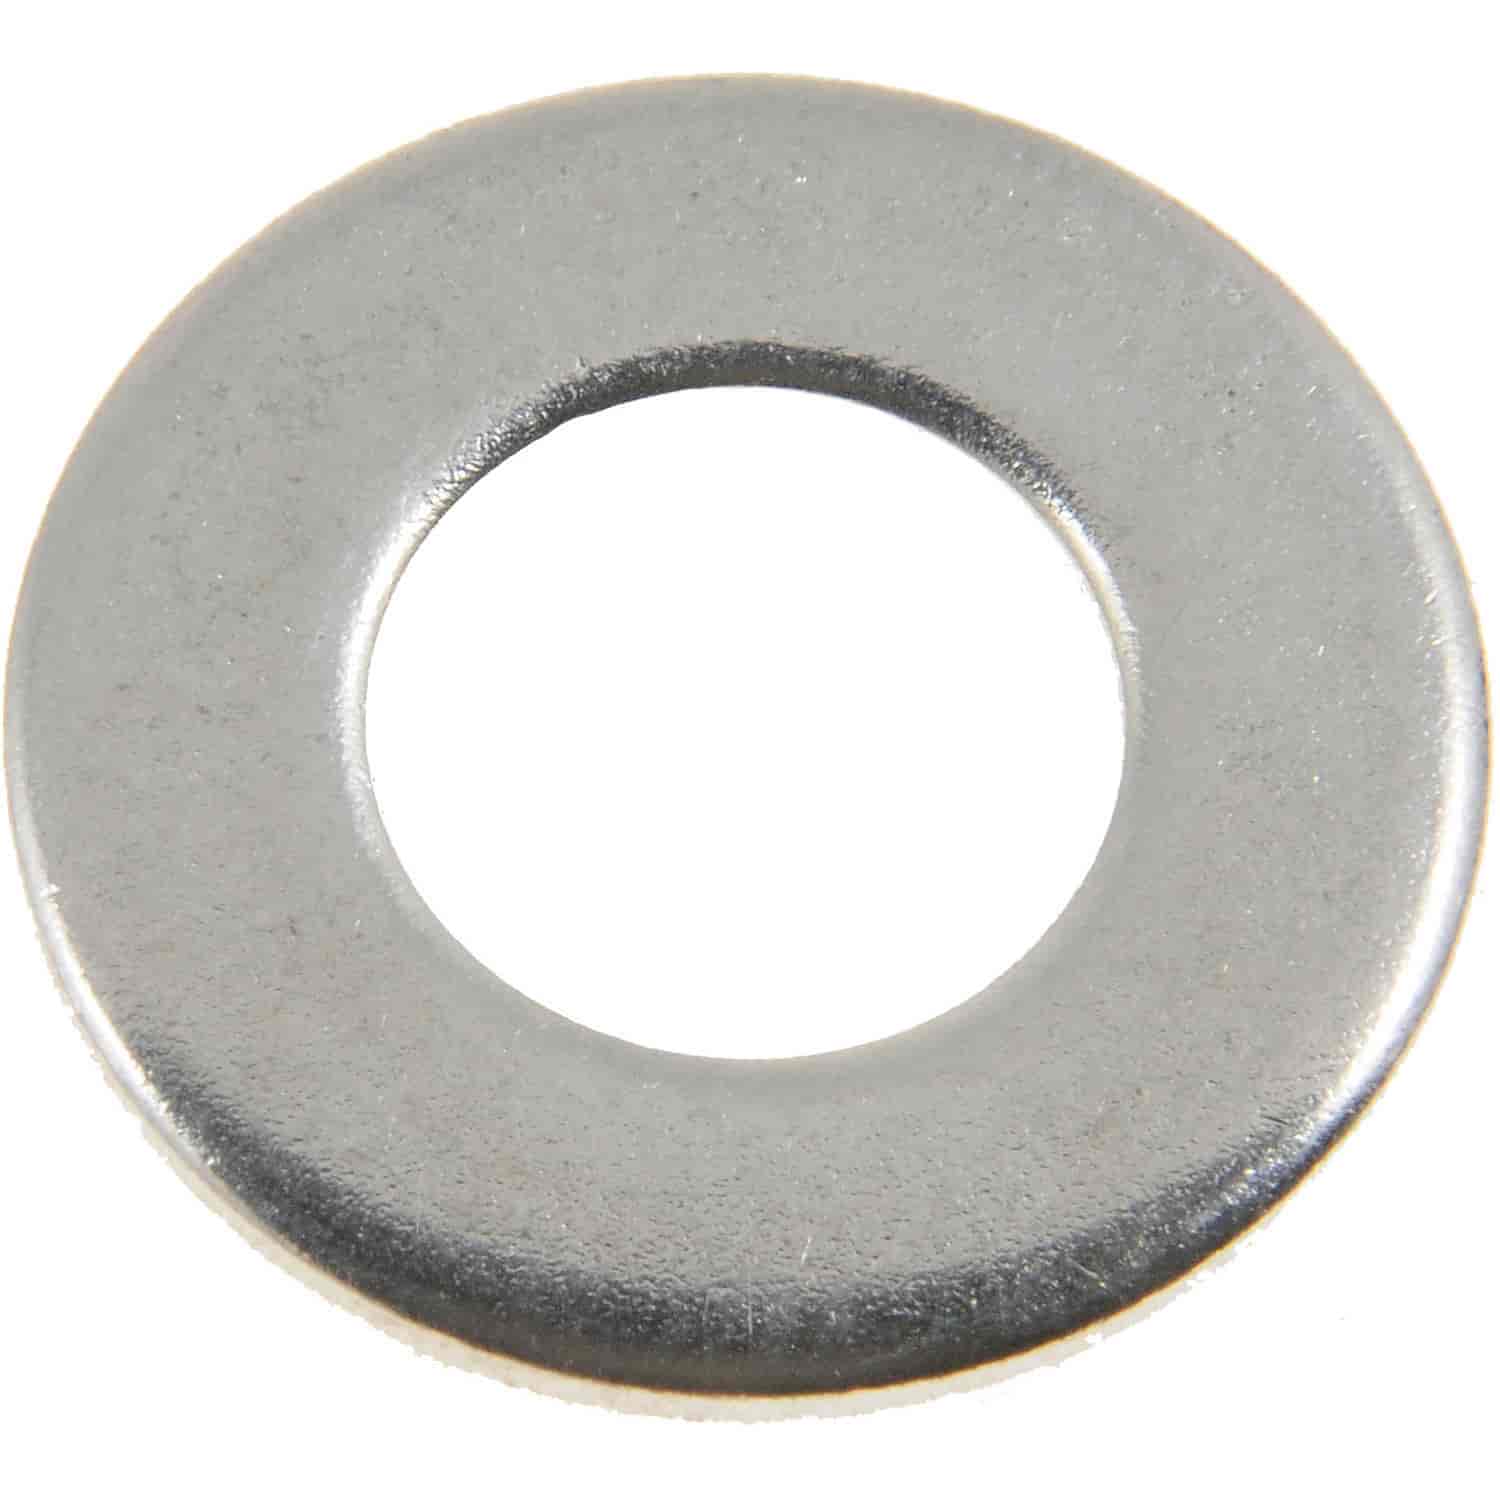 Flat Washer-Grade 5- 3/8 In.